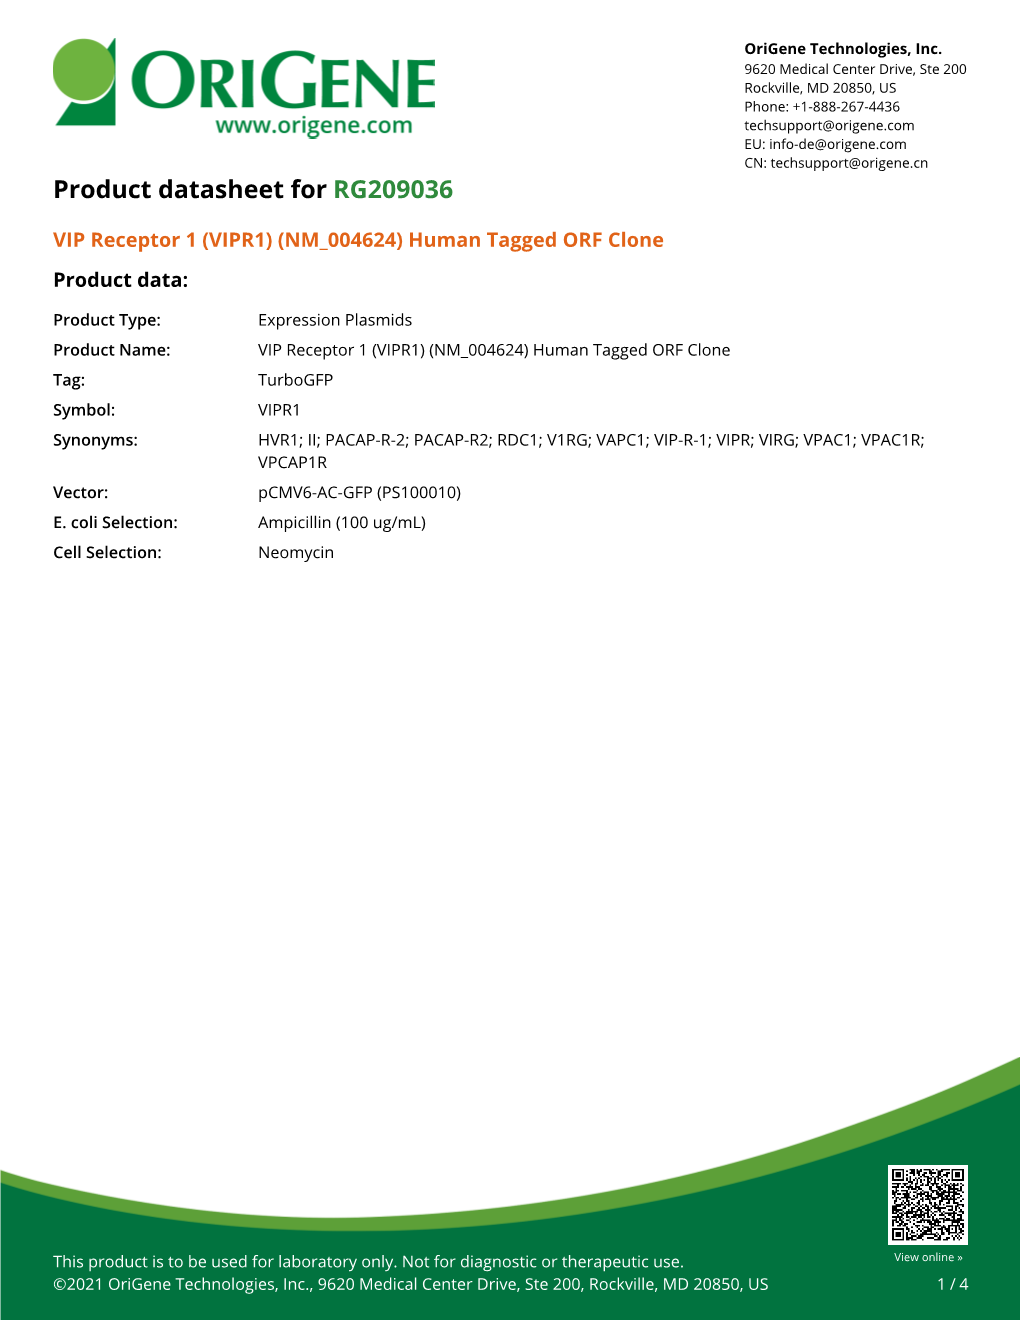 (VIPR1) (NM 004624) Human Tagged ORF Clone Product Data